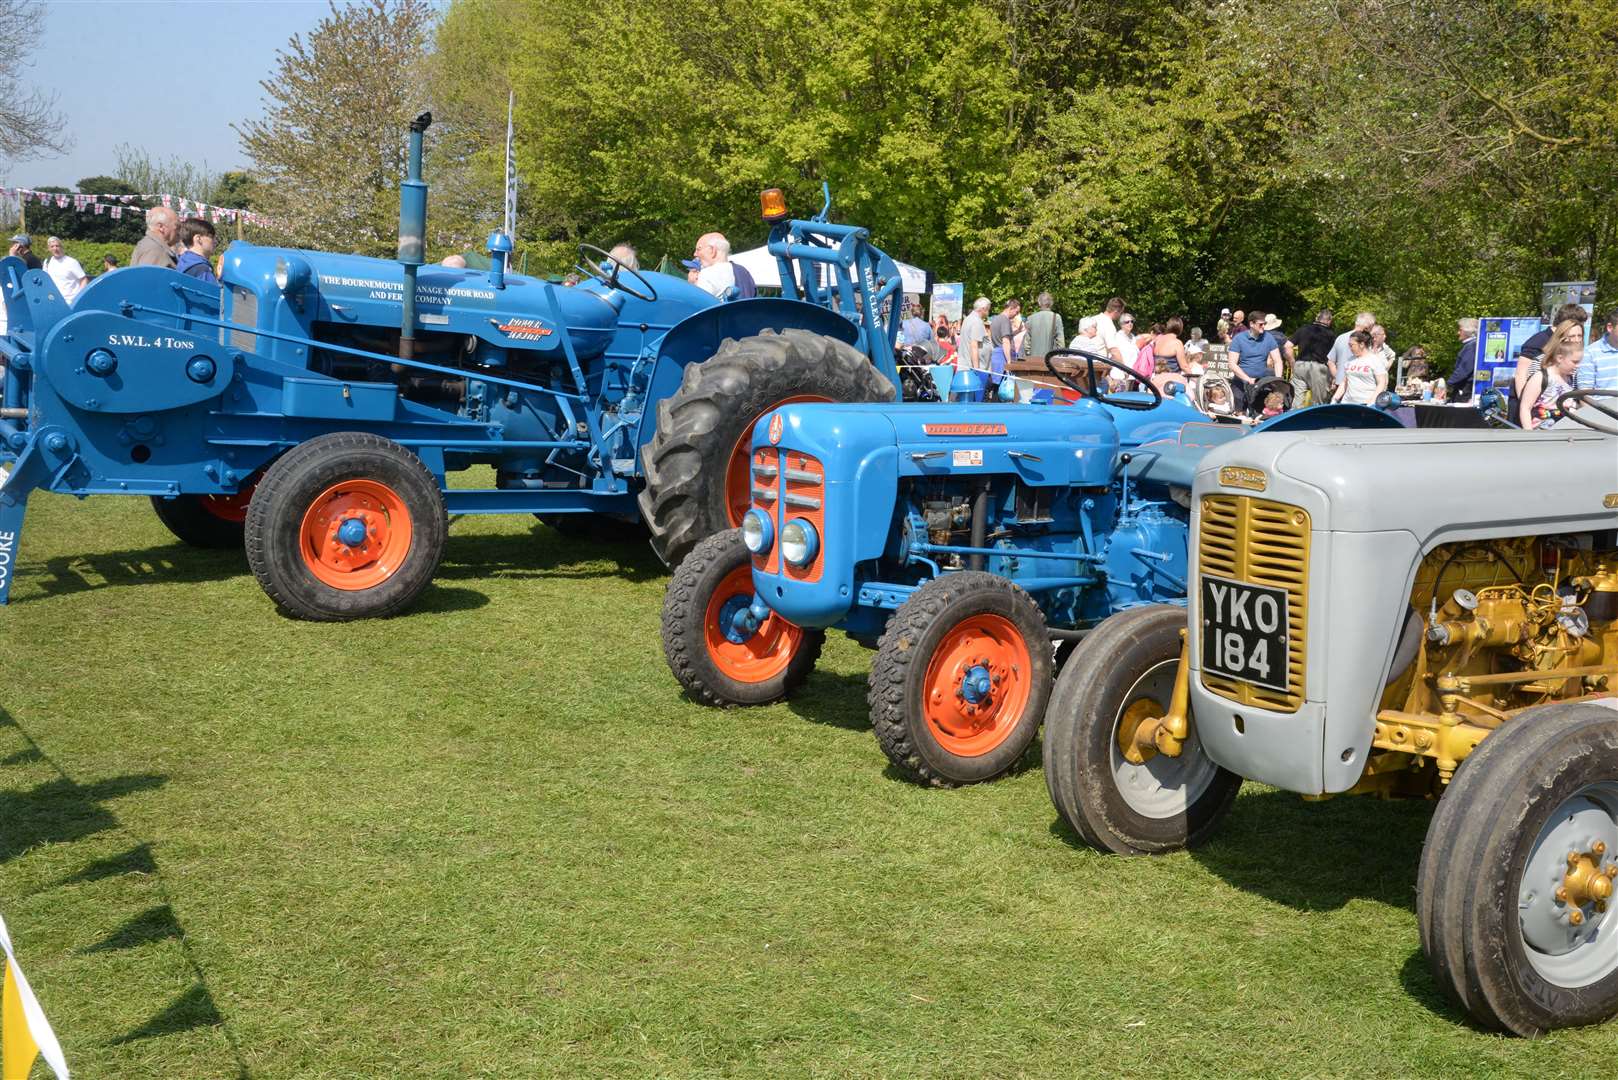 Vintage tractors on display at the English Festival in 2019